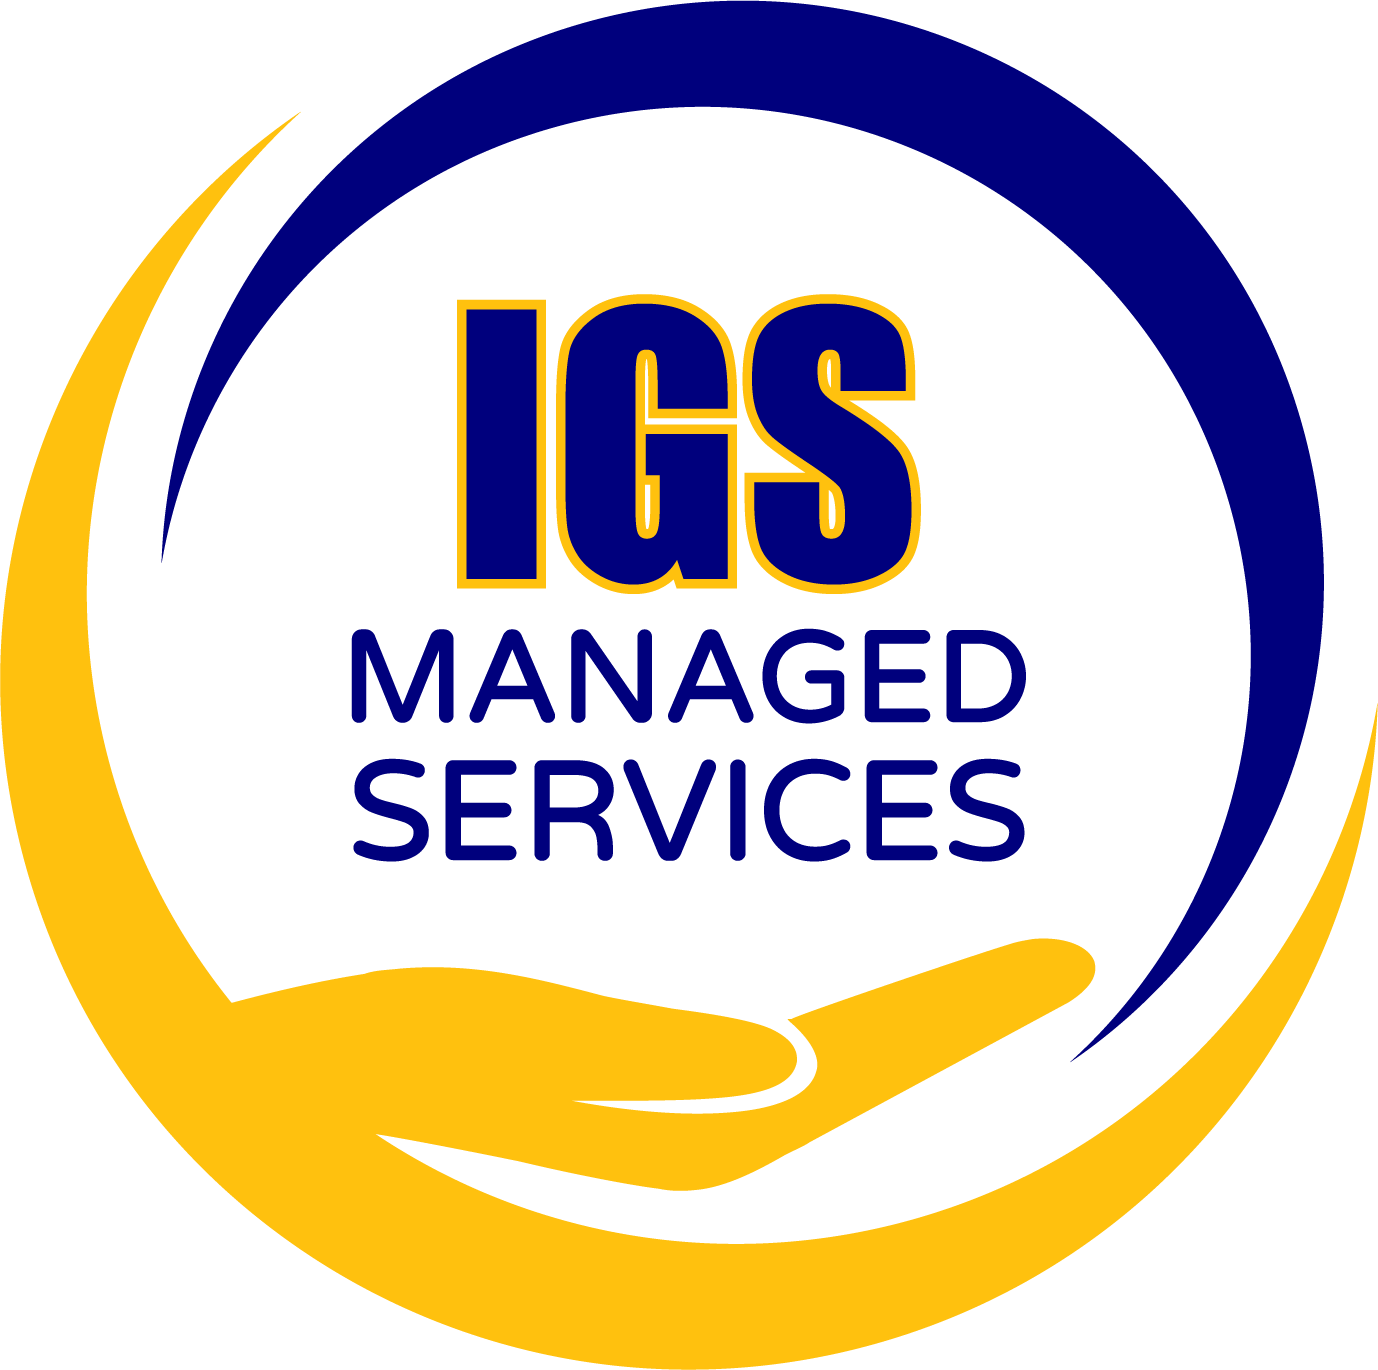 FA igs managed services logo Integrated Global Solutions Sdn Bhd. Malaysia's leading IT Cloud Computing & System Integration Company.